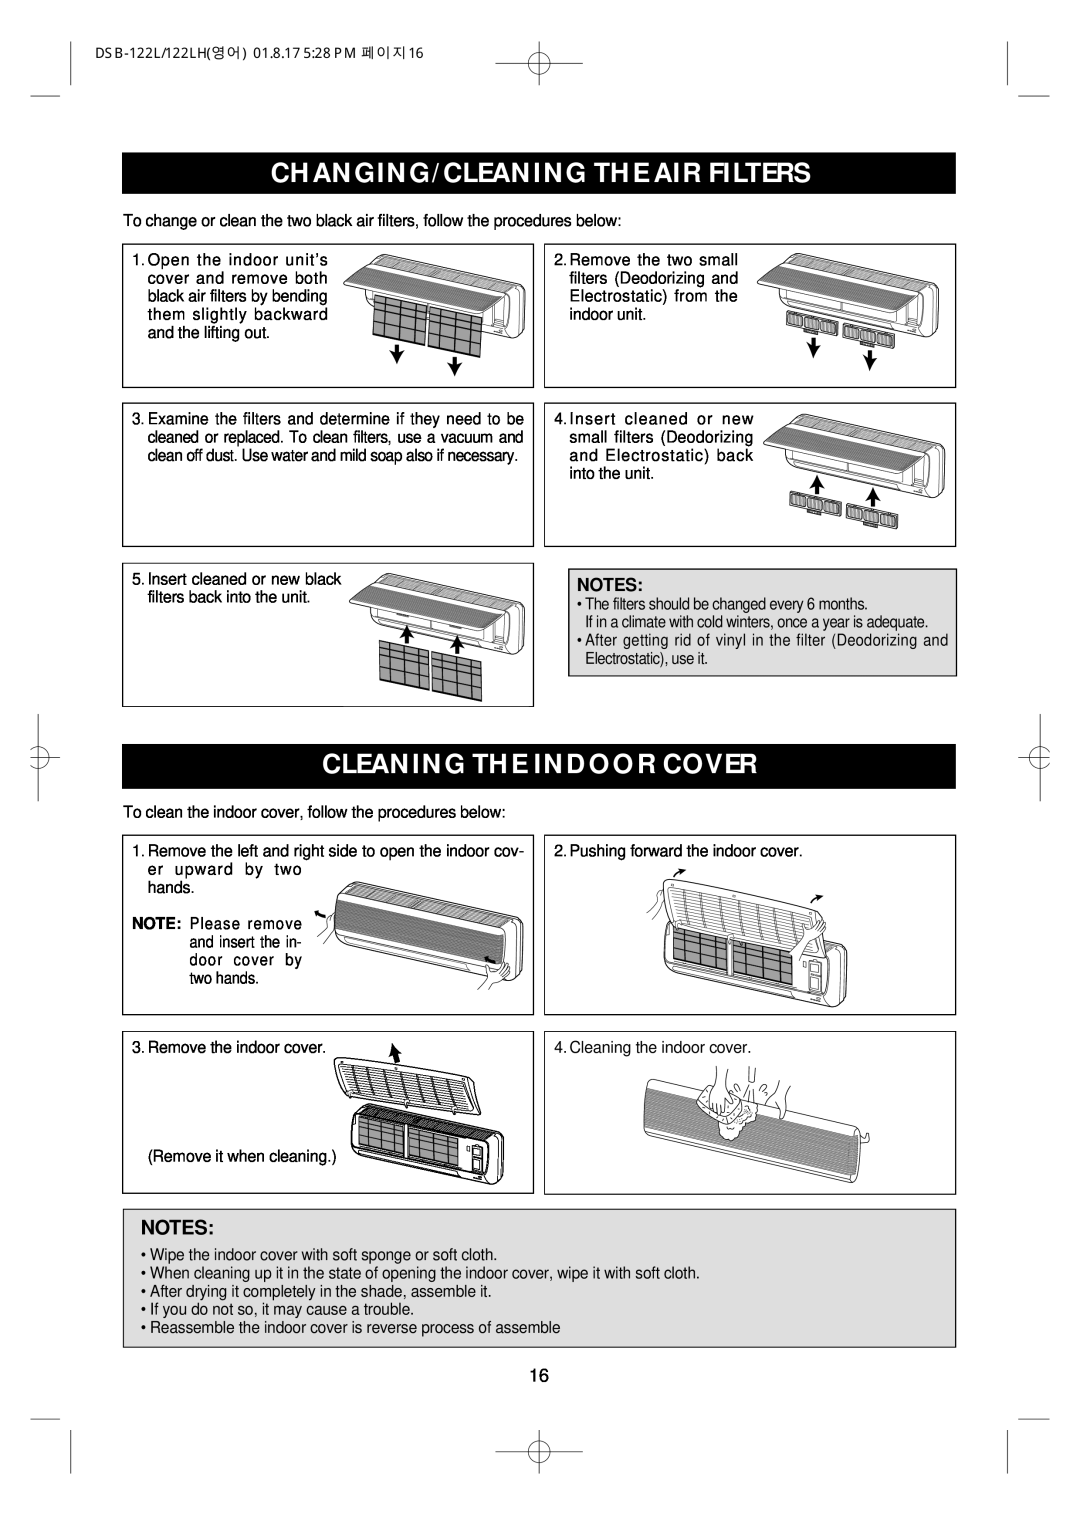 Daewoo DSB-122LH owner manual Changing/Cleaning The Air Filters, Cleaning The Indoor Cover 